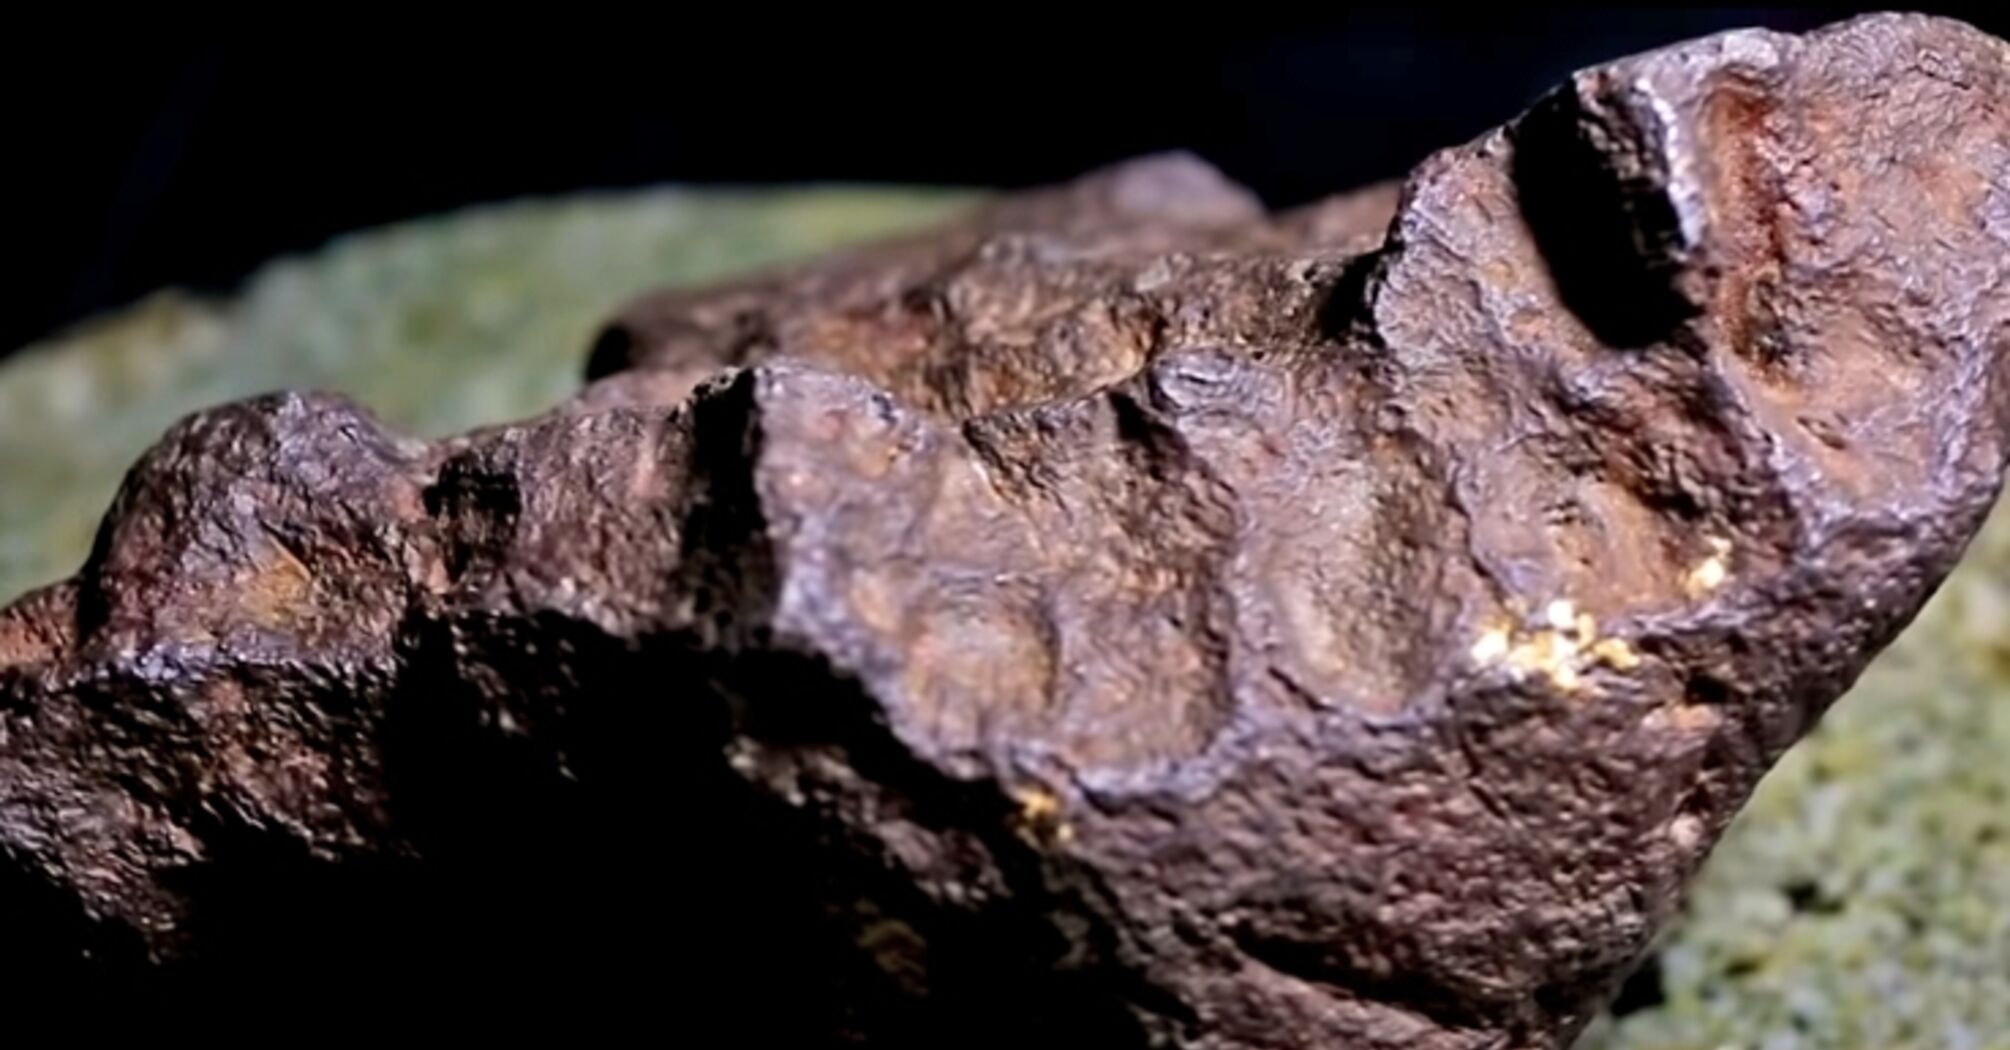 In the USA, a man supported a barn door on a farm with a meteorite for $75,000 (video)